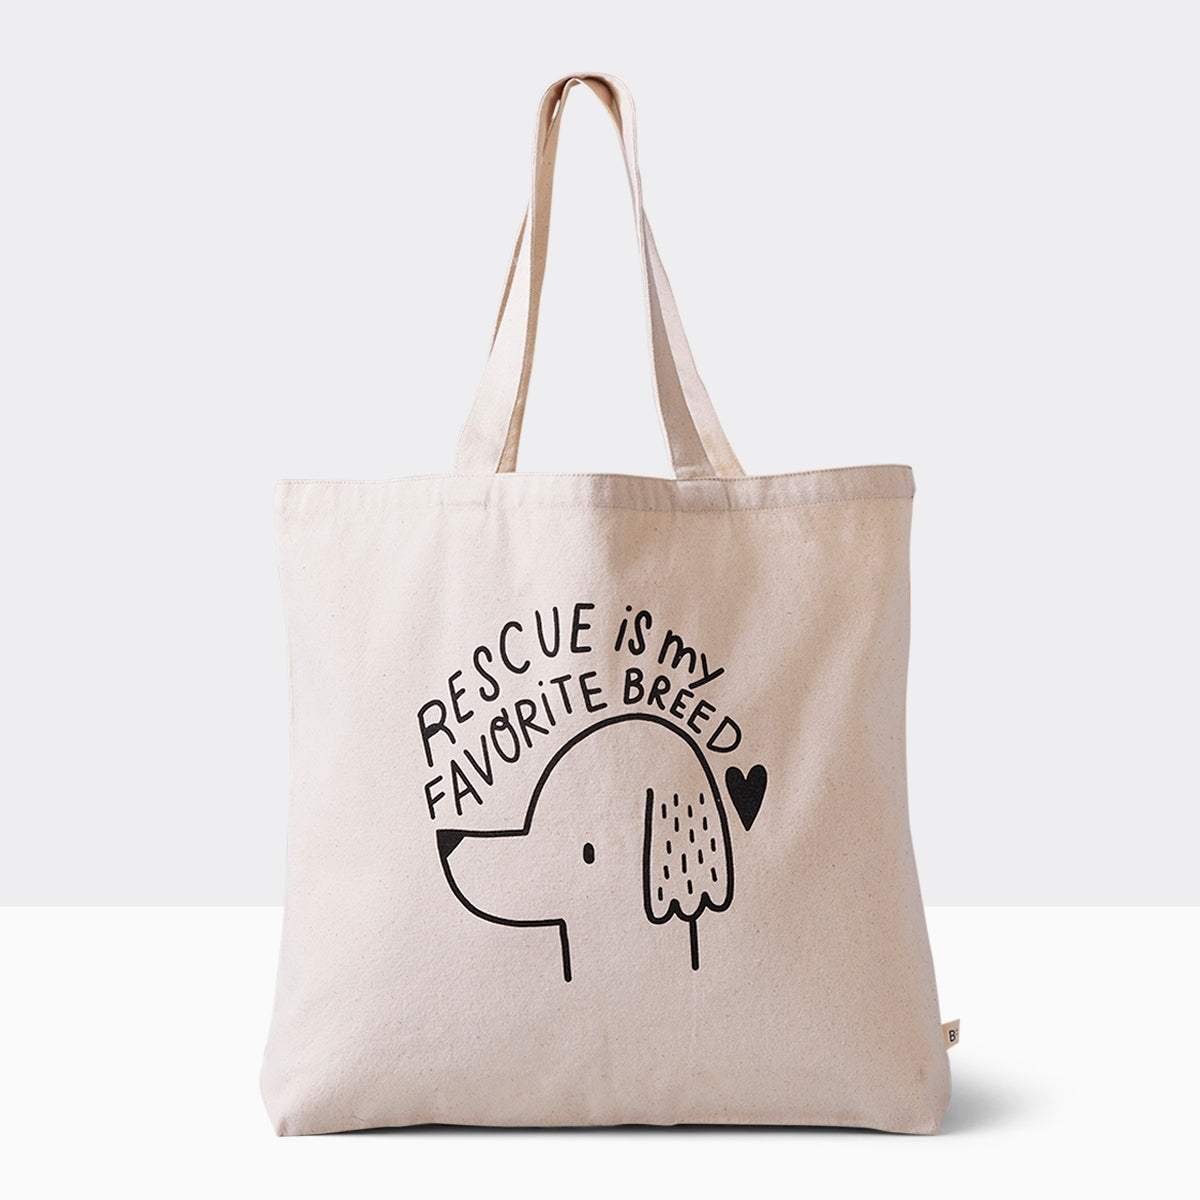 Spacious cotton canvas tote bag featuring a heartwarming dog illustration and the message 'Rescue is my favorite breed,' perfect for eco-conscious pet lovers. Bag is 17.5" wide and 15.5" tall with 10" drop handles, sitting on a plain white surface.